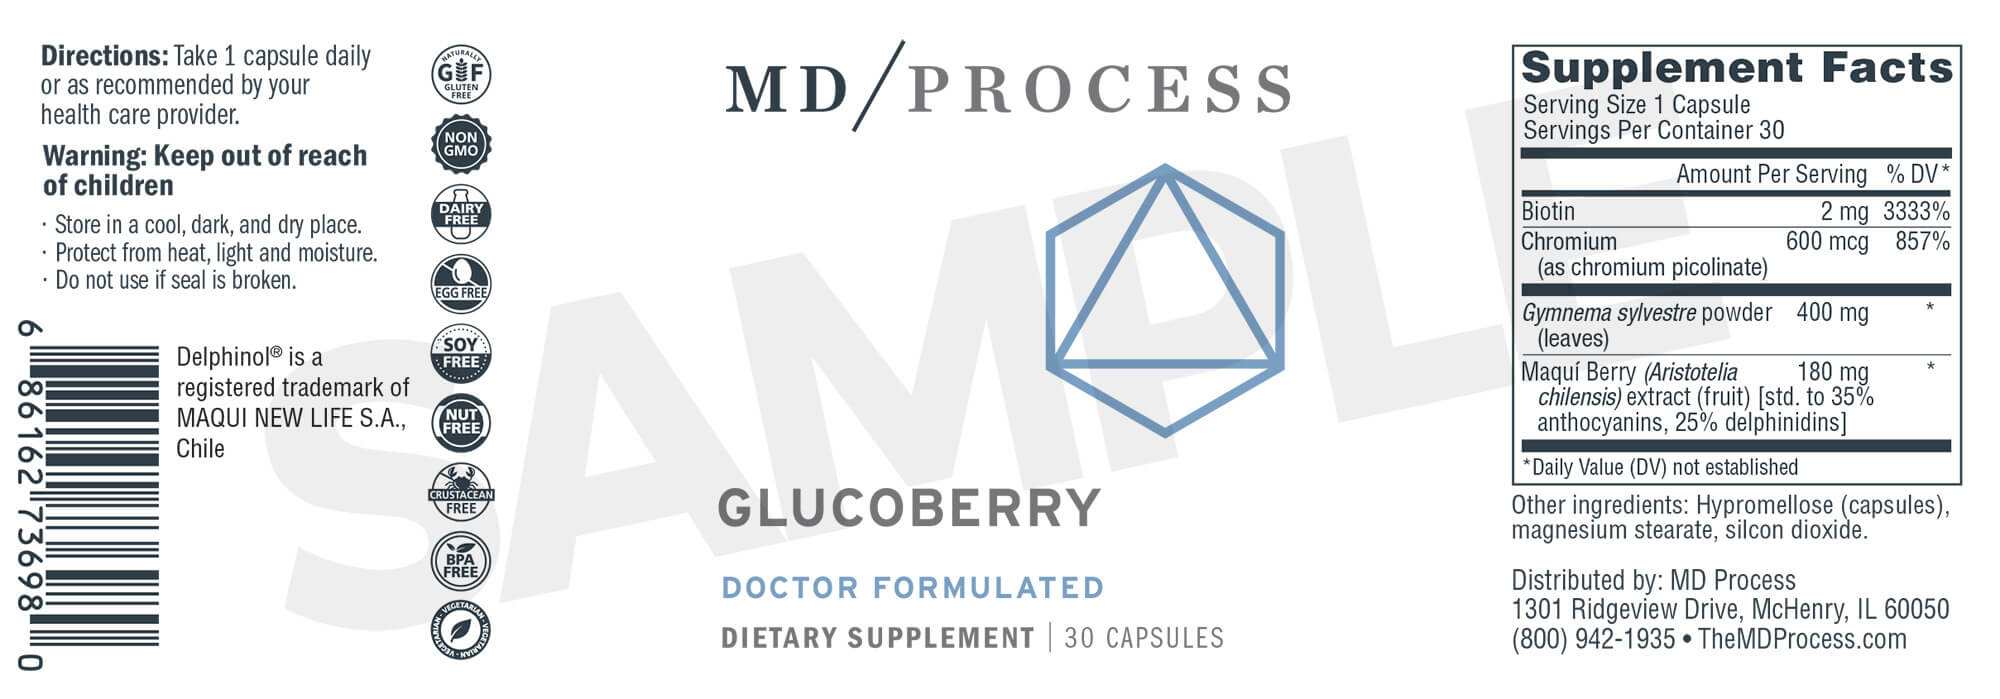 MD Process GlucoBerry Label